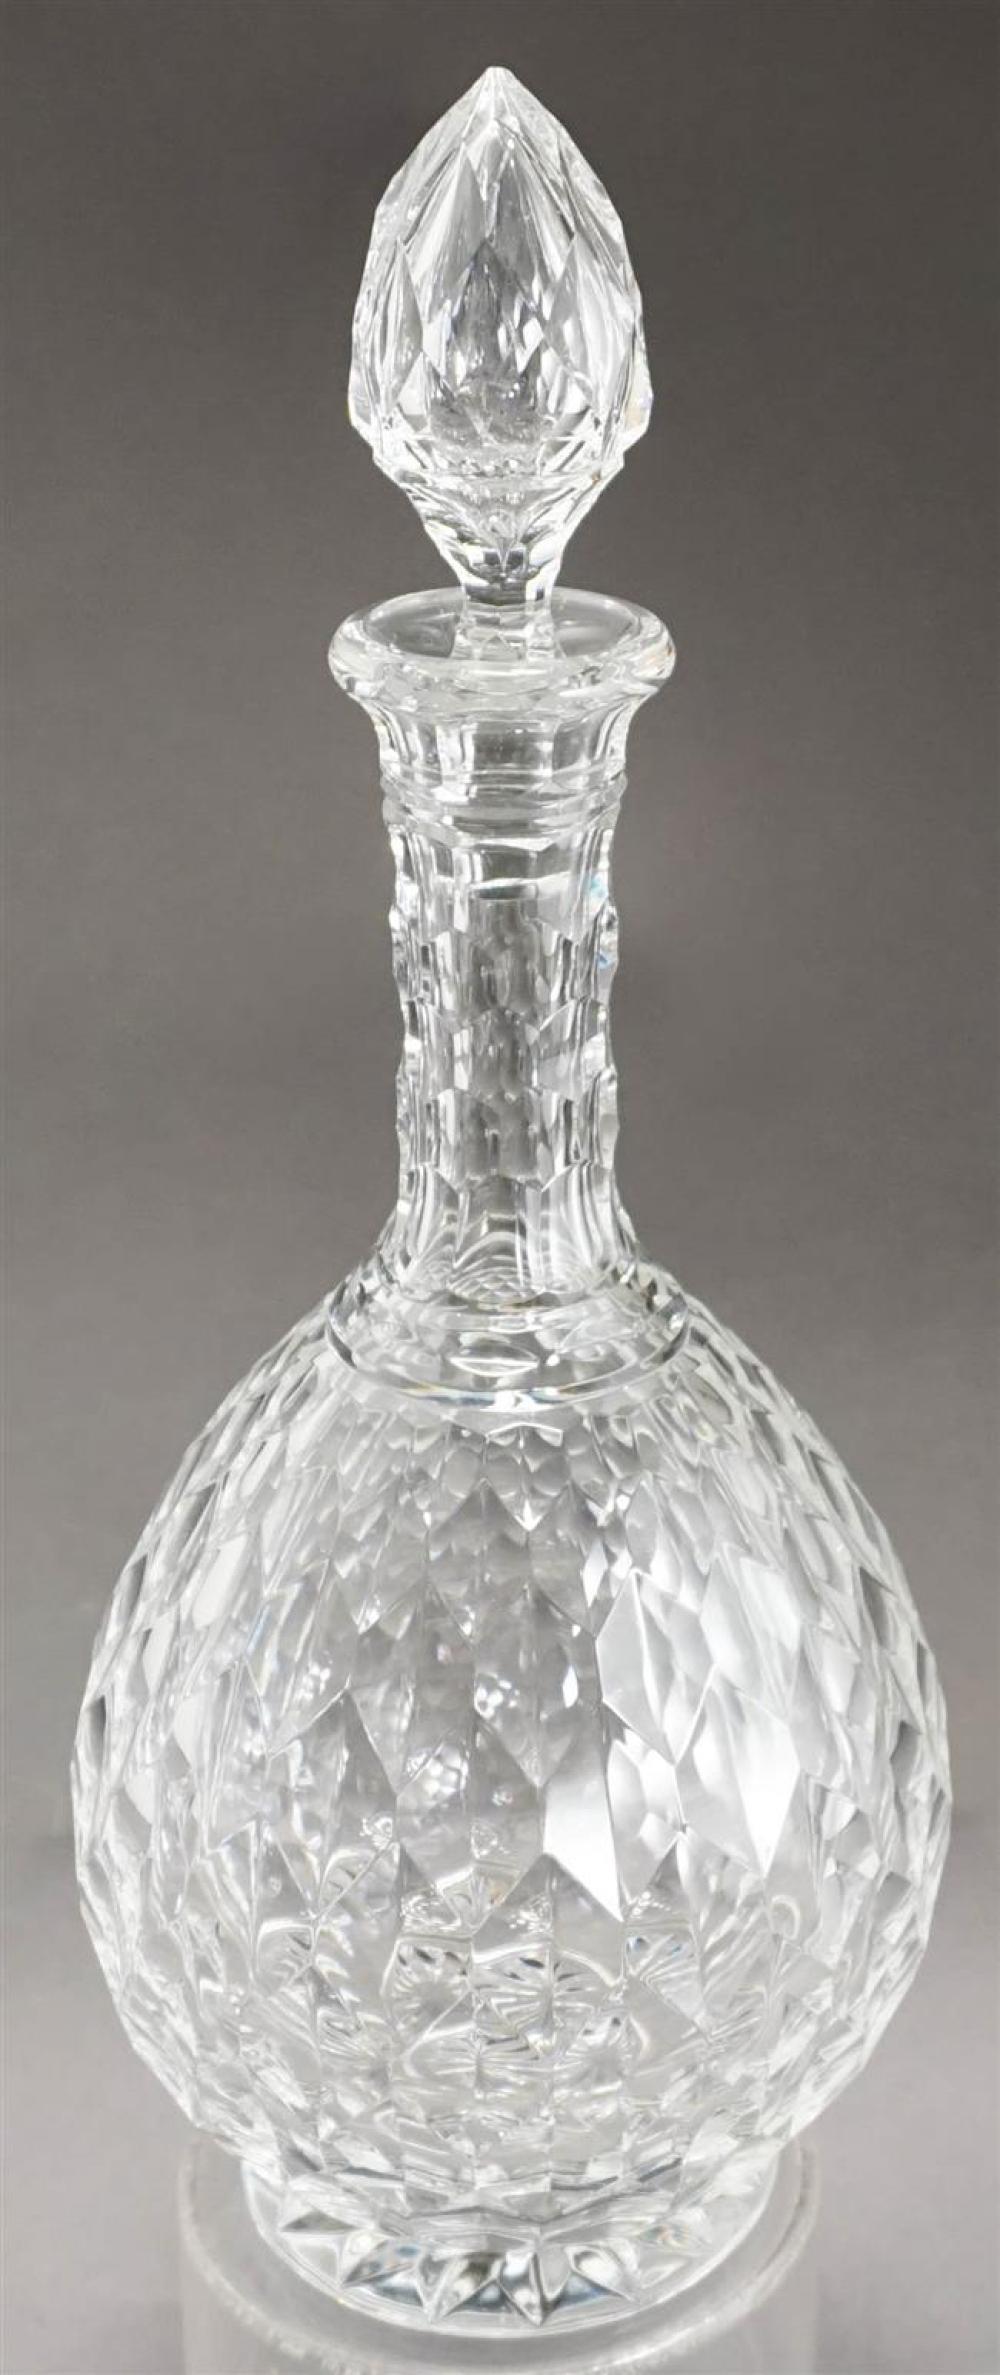 BACCARAT CRYSTAL DECANTER H 13 323f76